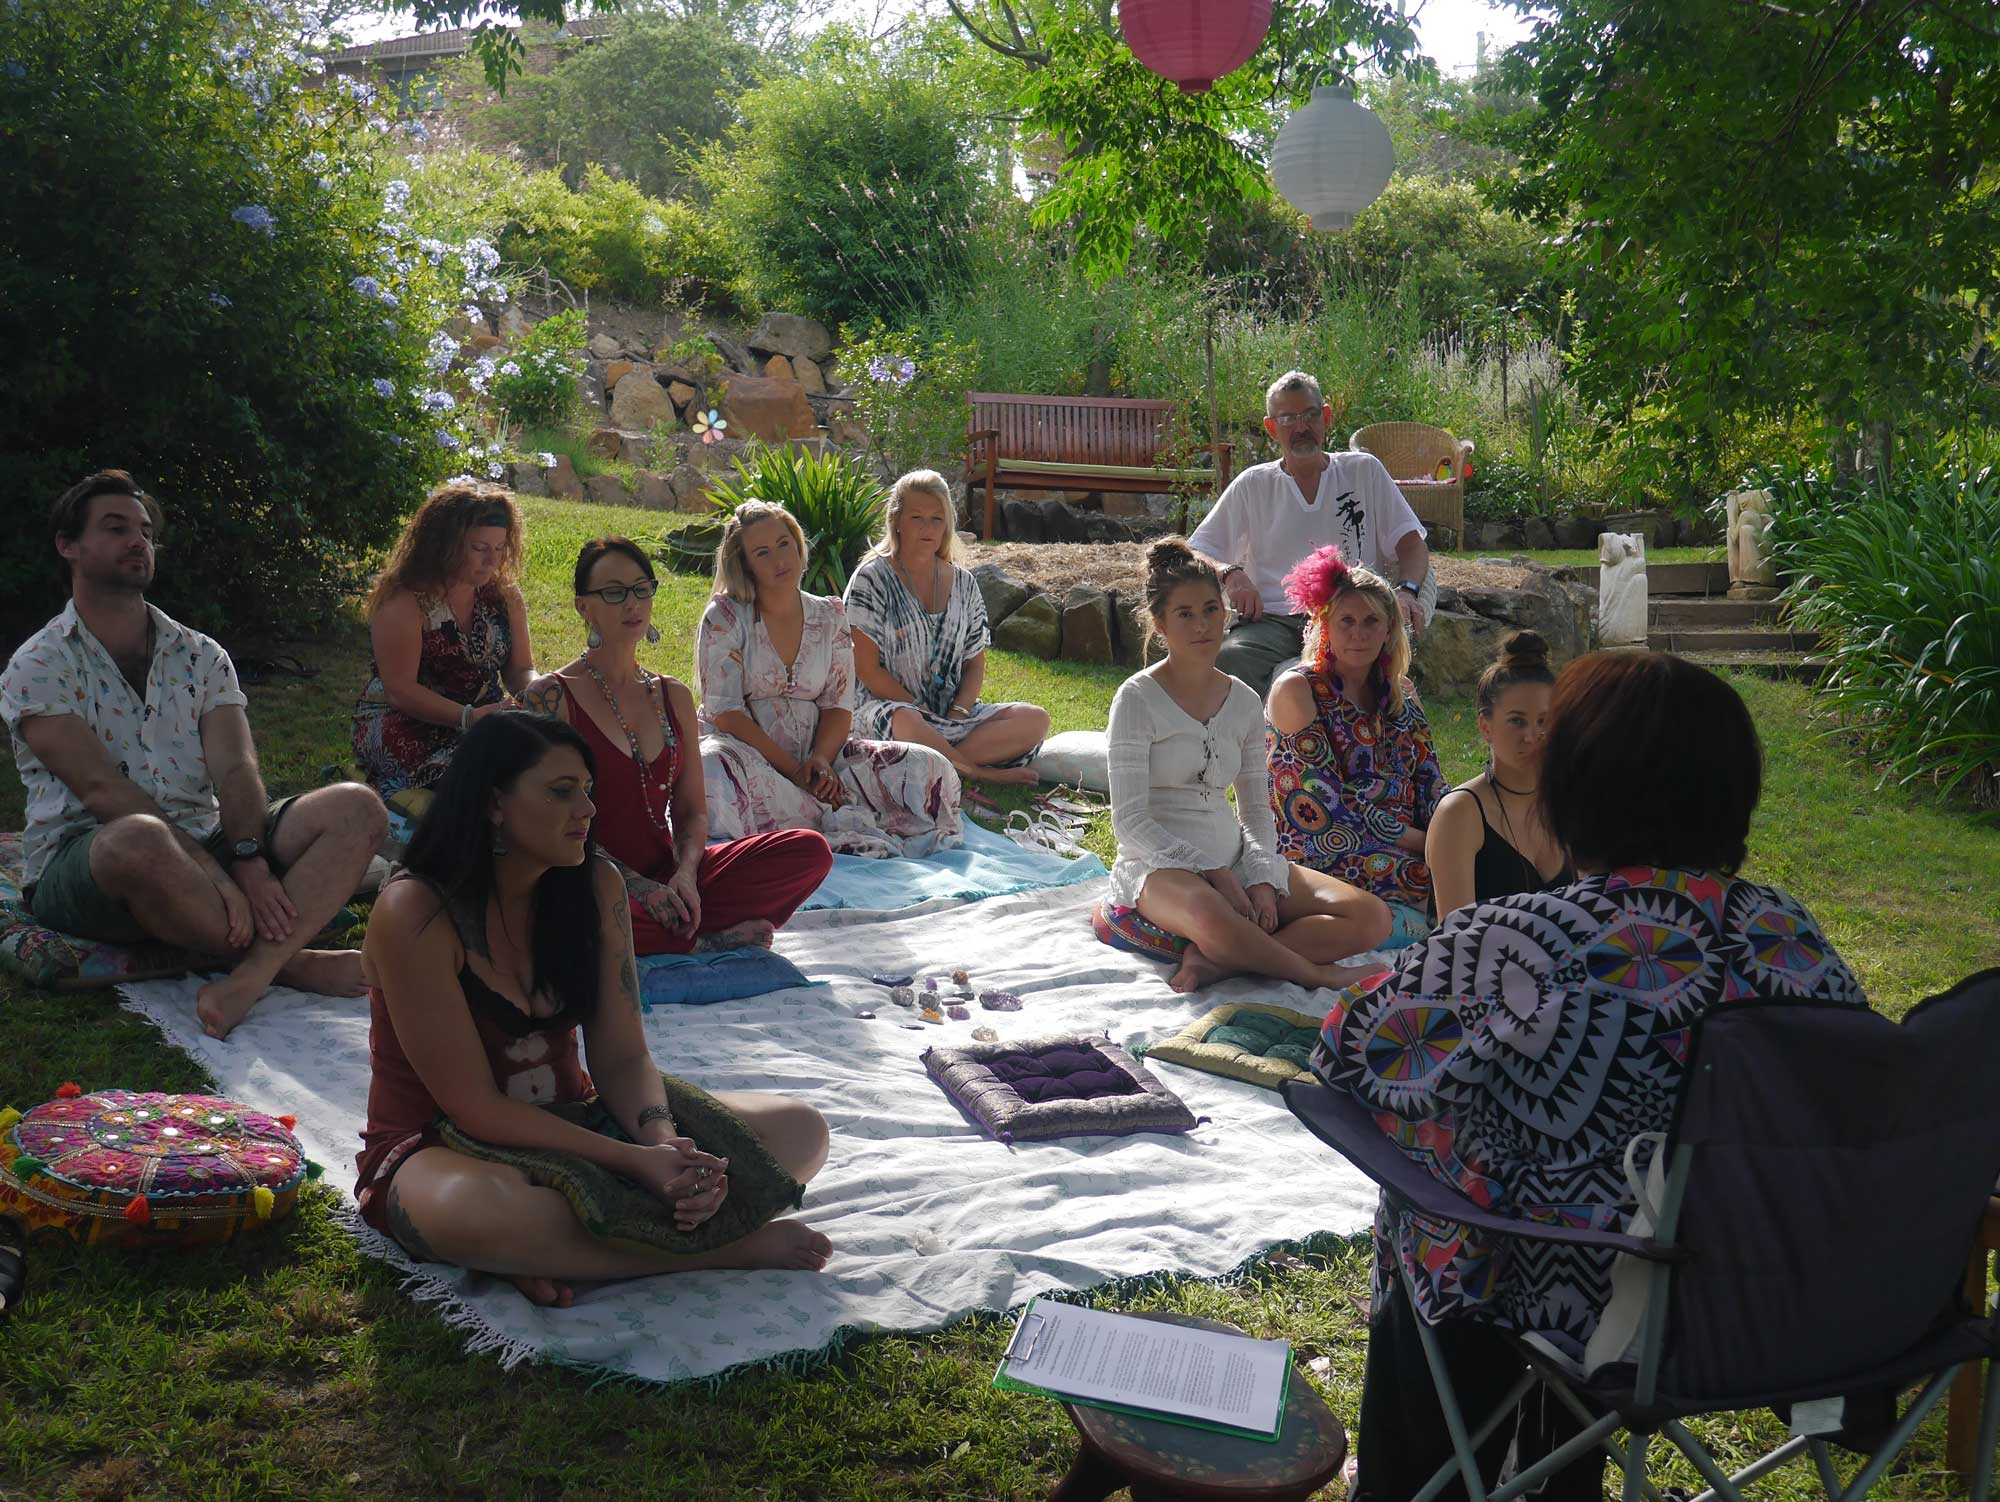 meditation for peace under the tree in the garden